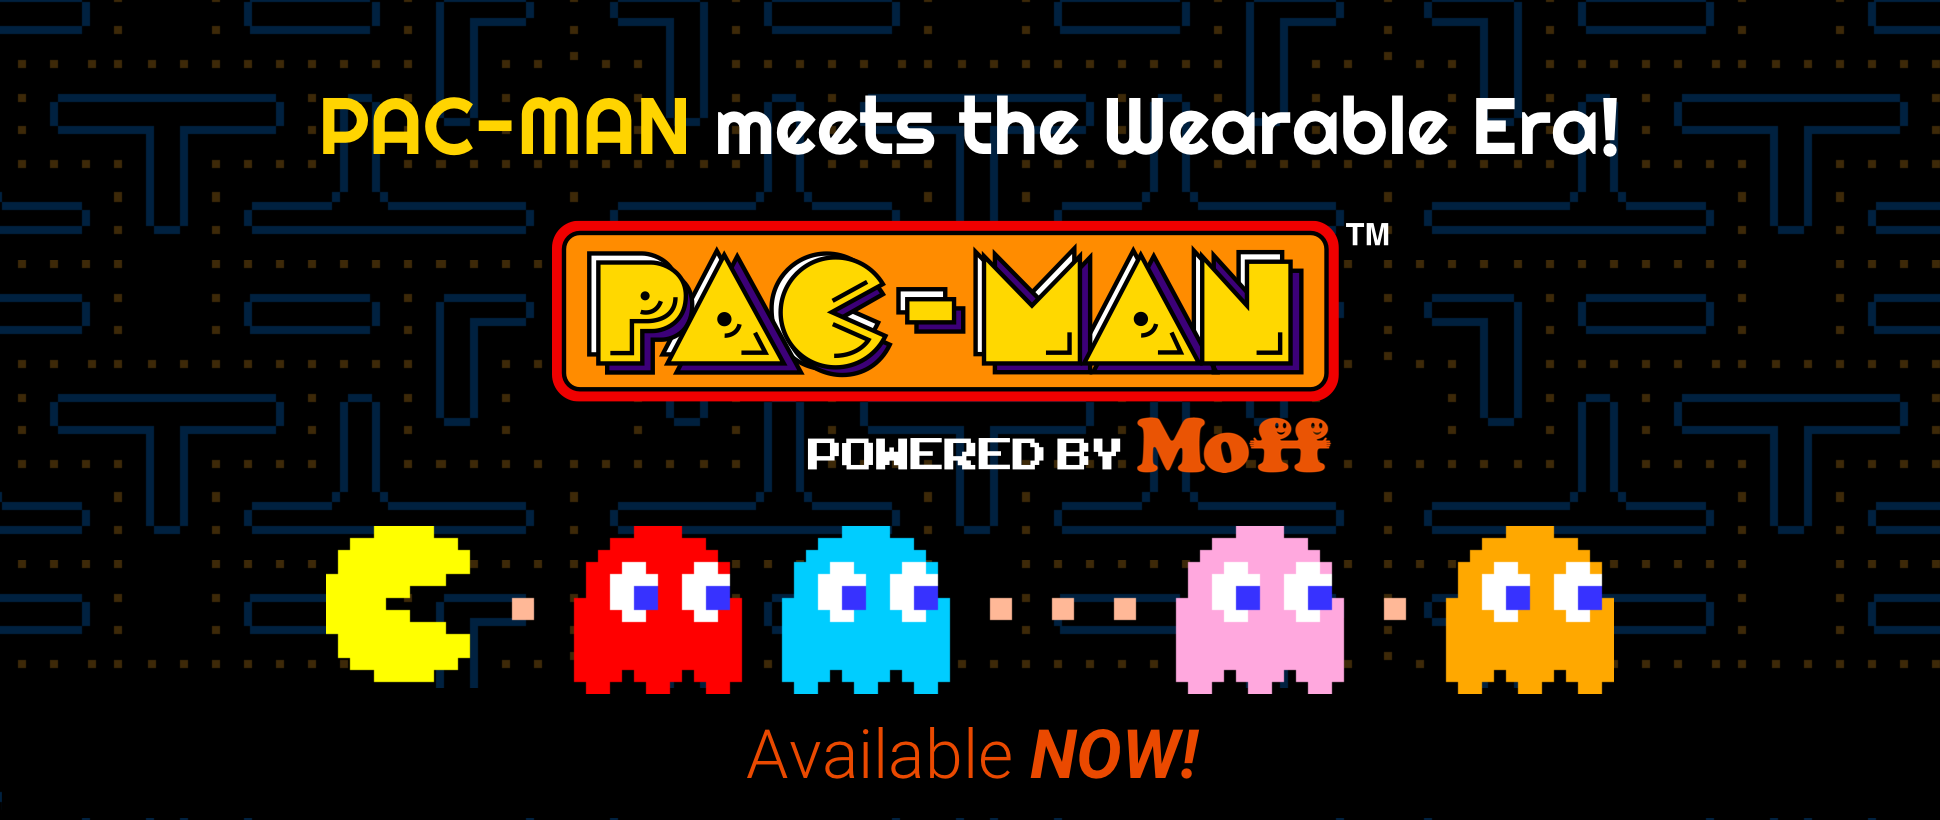 new app Moff PAC-MAN download now!